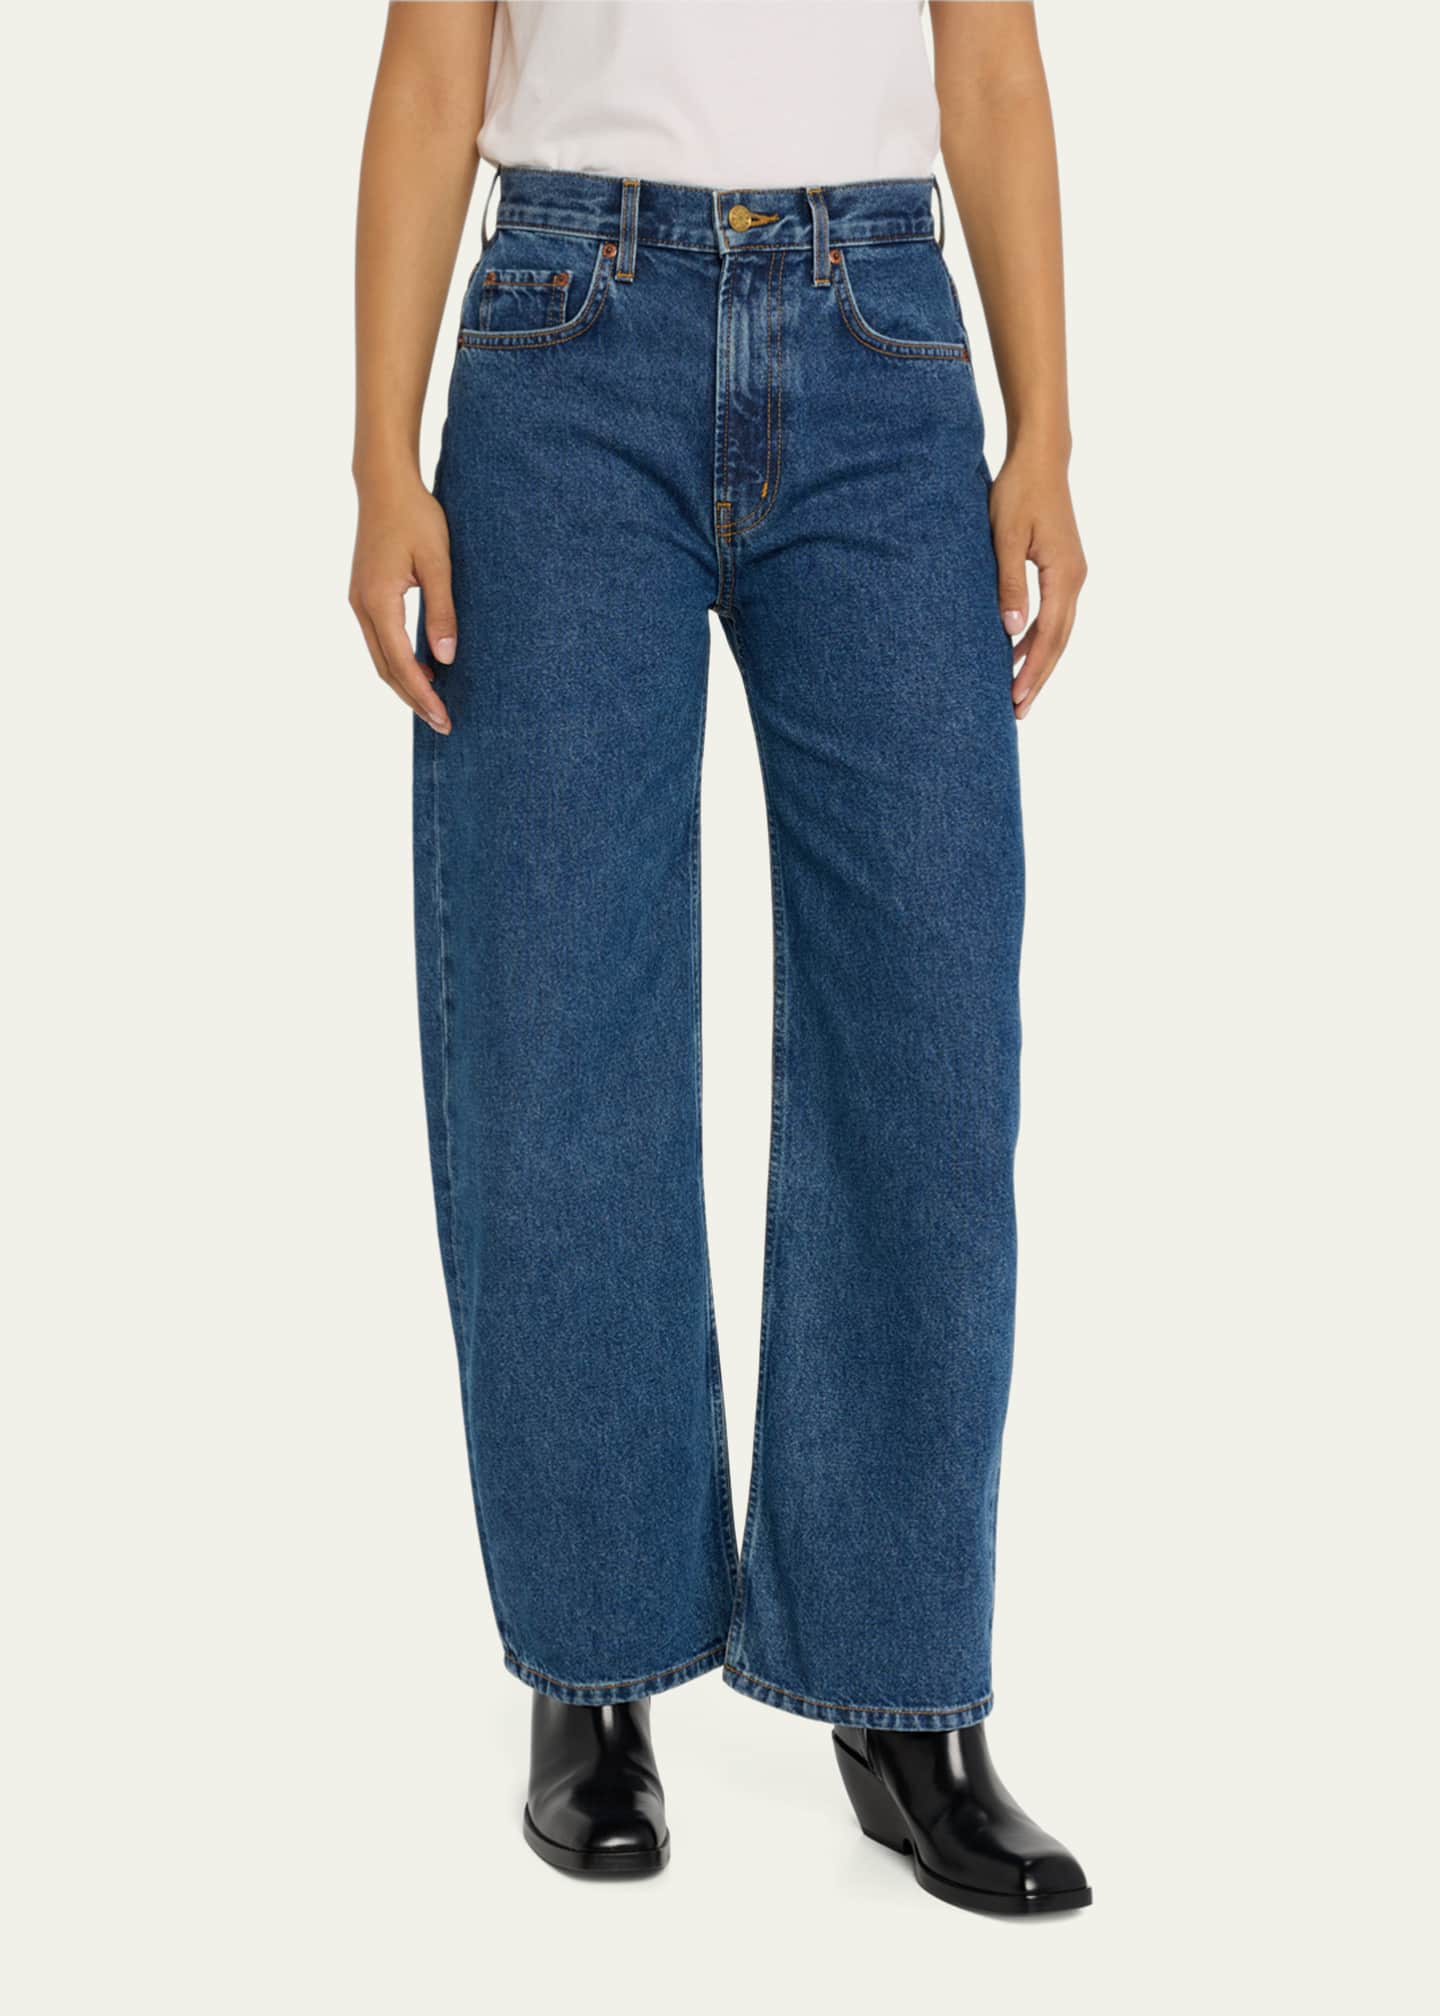 B SIDES Leroy Mid-Rise Relaxed Bow-Leg Jeans - Bergdorf Goodman